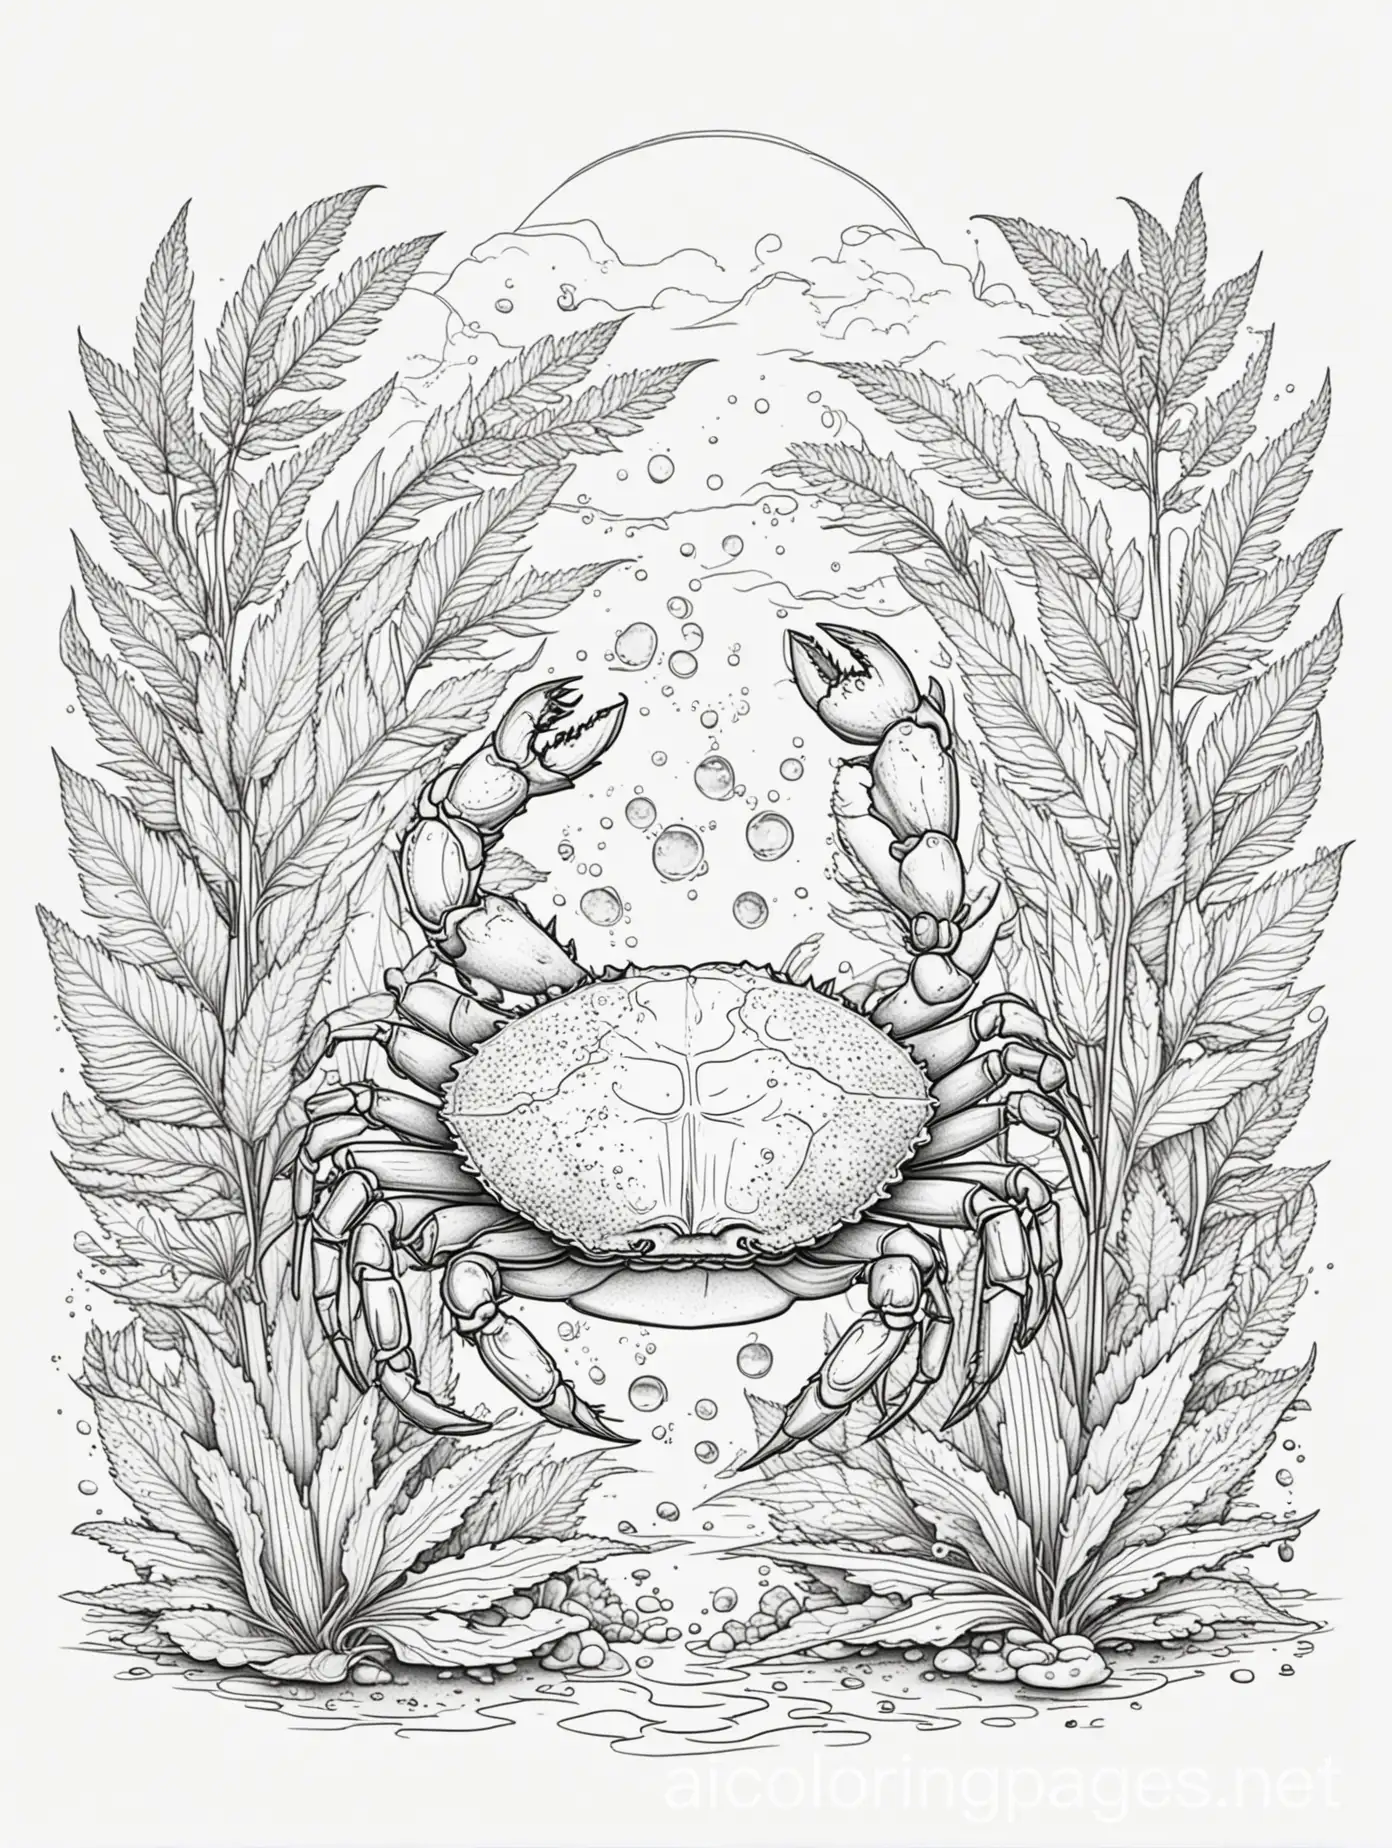 crab cannabis fantasy, Coloring Page, black and white, line art, white background, Simplicity, Ample White Space. The background of the coloring page is plain white to make it easy for young children to color within the lines. The outlines of all the subjects are easy to distinguish, making it simple for kids to color without too much difficulty